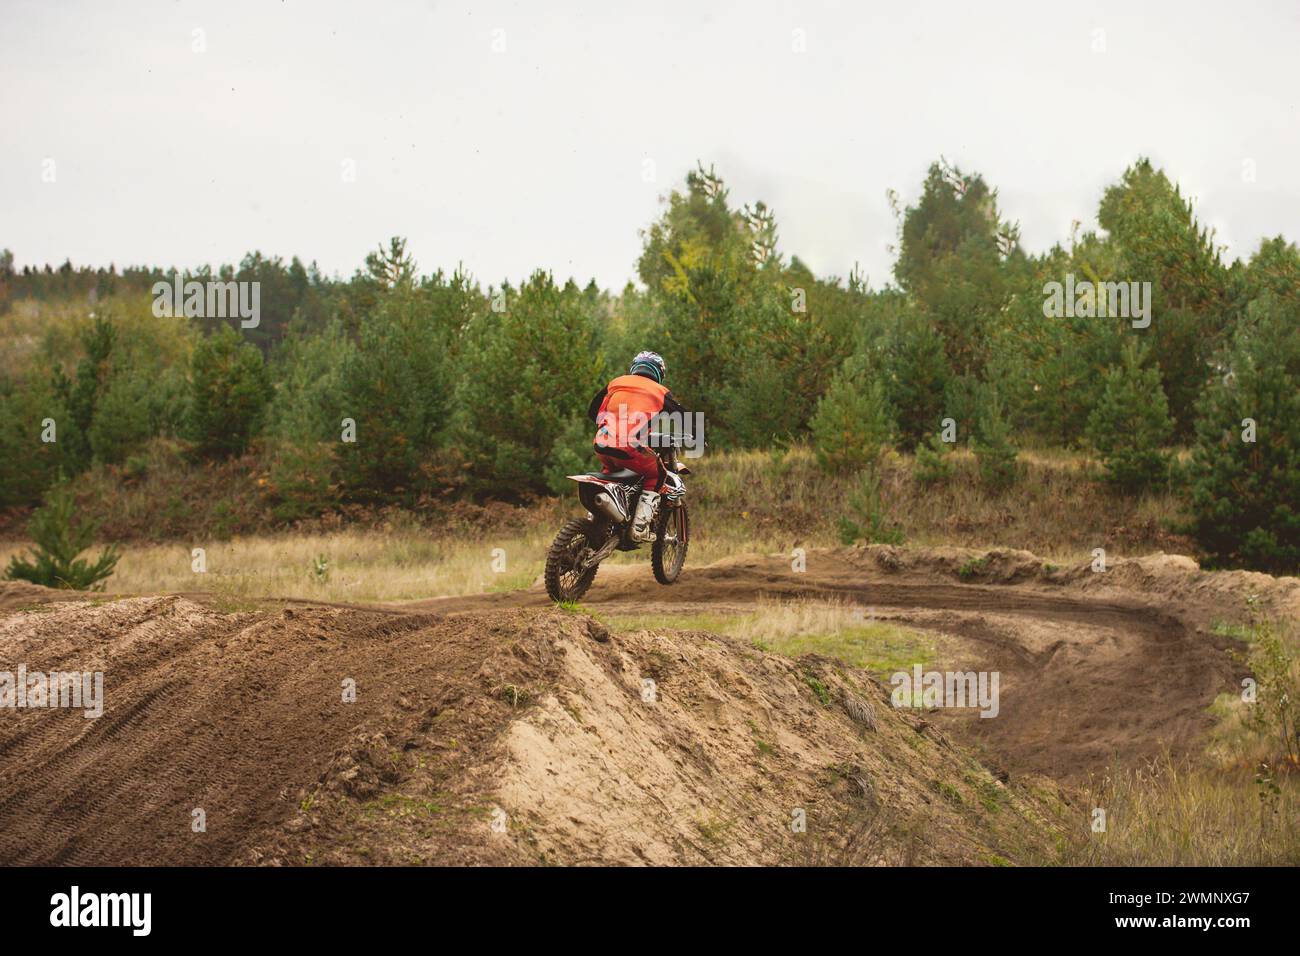 24 september 2016 - Volgsk, Russia, MX moto cross racing - competition near districts Stock Photo